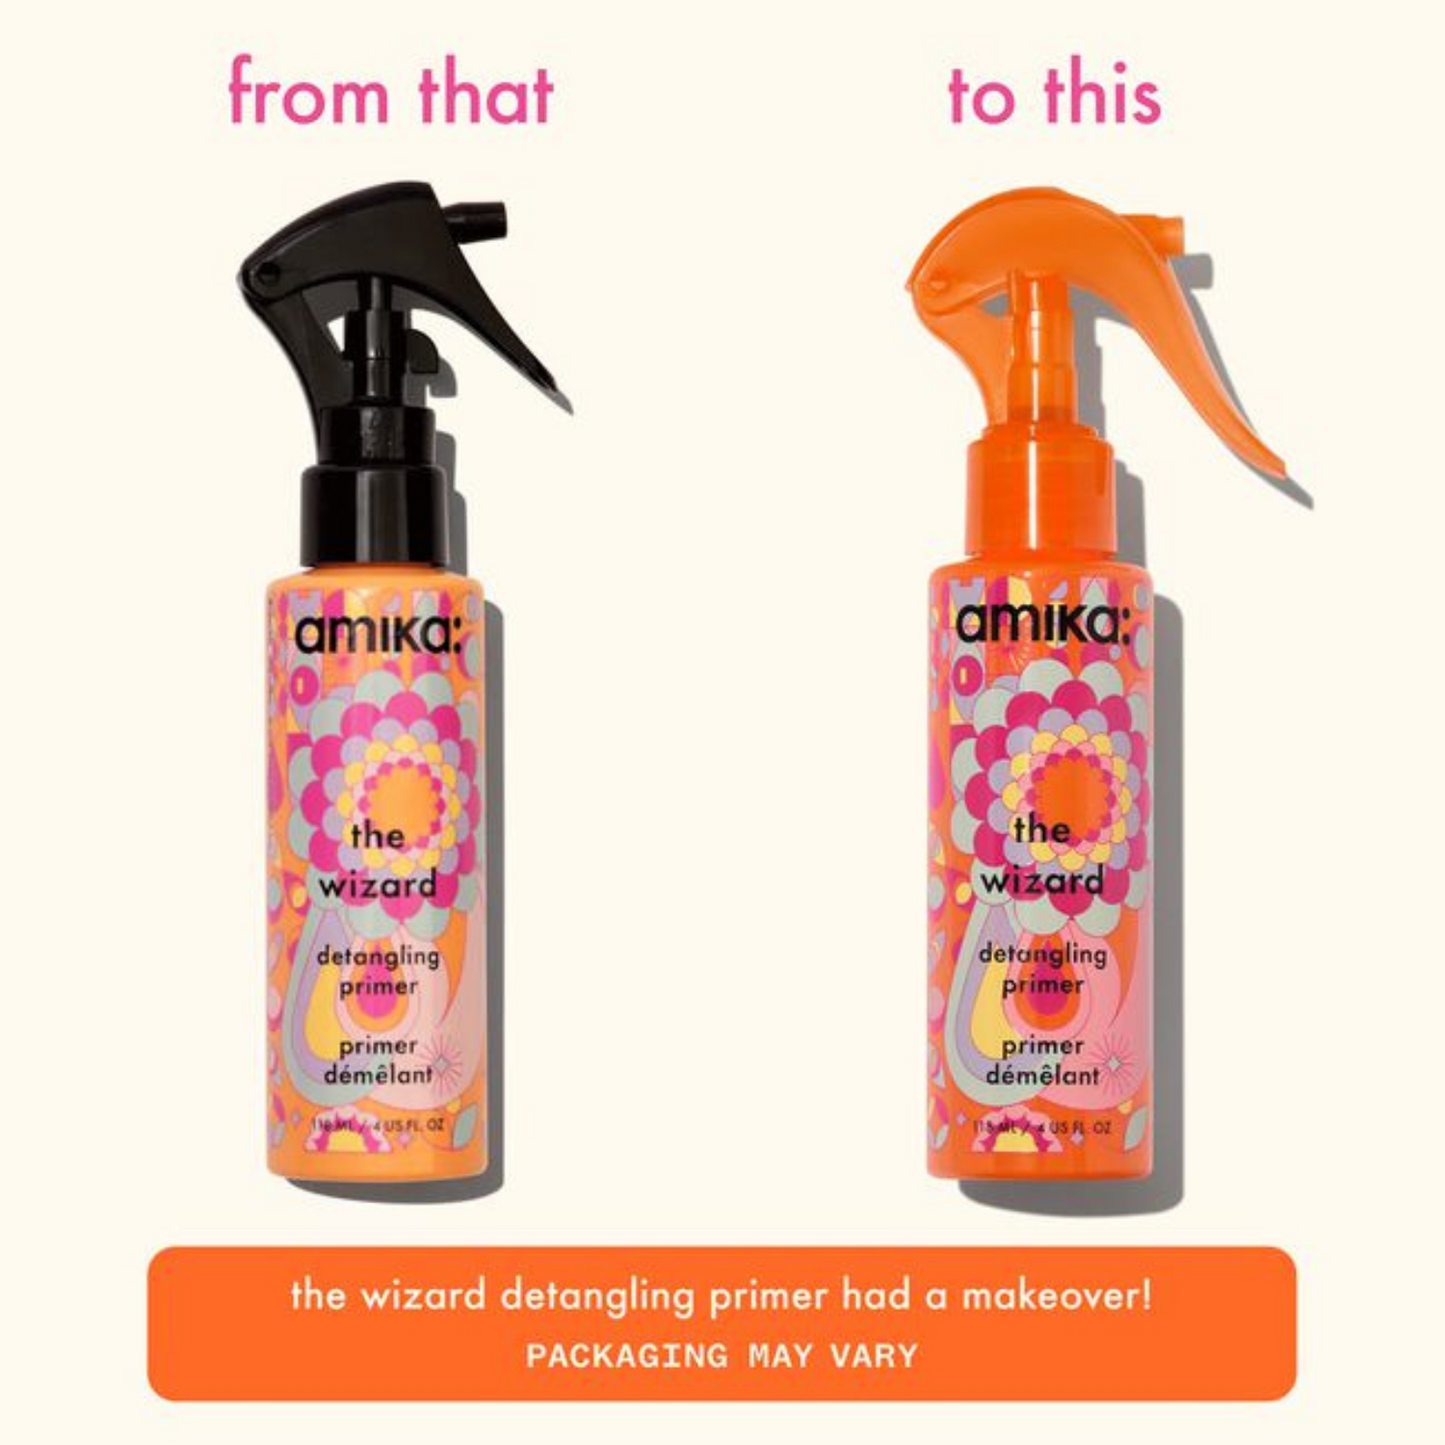 Prime your hair safely and effectively with this all-in-one heat damage protection and detangling hair priming spray. What’s even better is you can use this product on straight, curly, or coily hair - All hair textures welcome!  Free from sulfates, parabens, phthalates, mineral oil, and petrolatum.  Is safe for: Color treated hair. Keratin treated hair. Hair extensions.